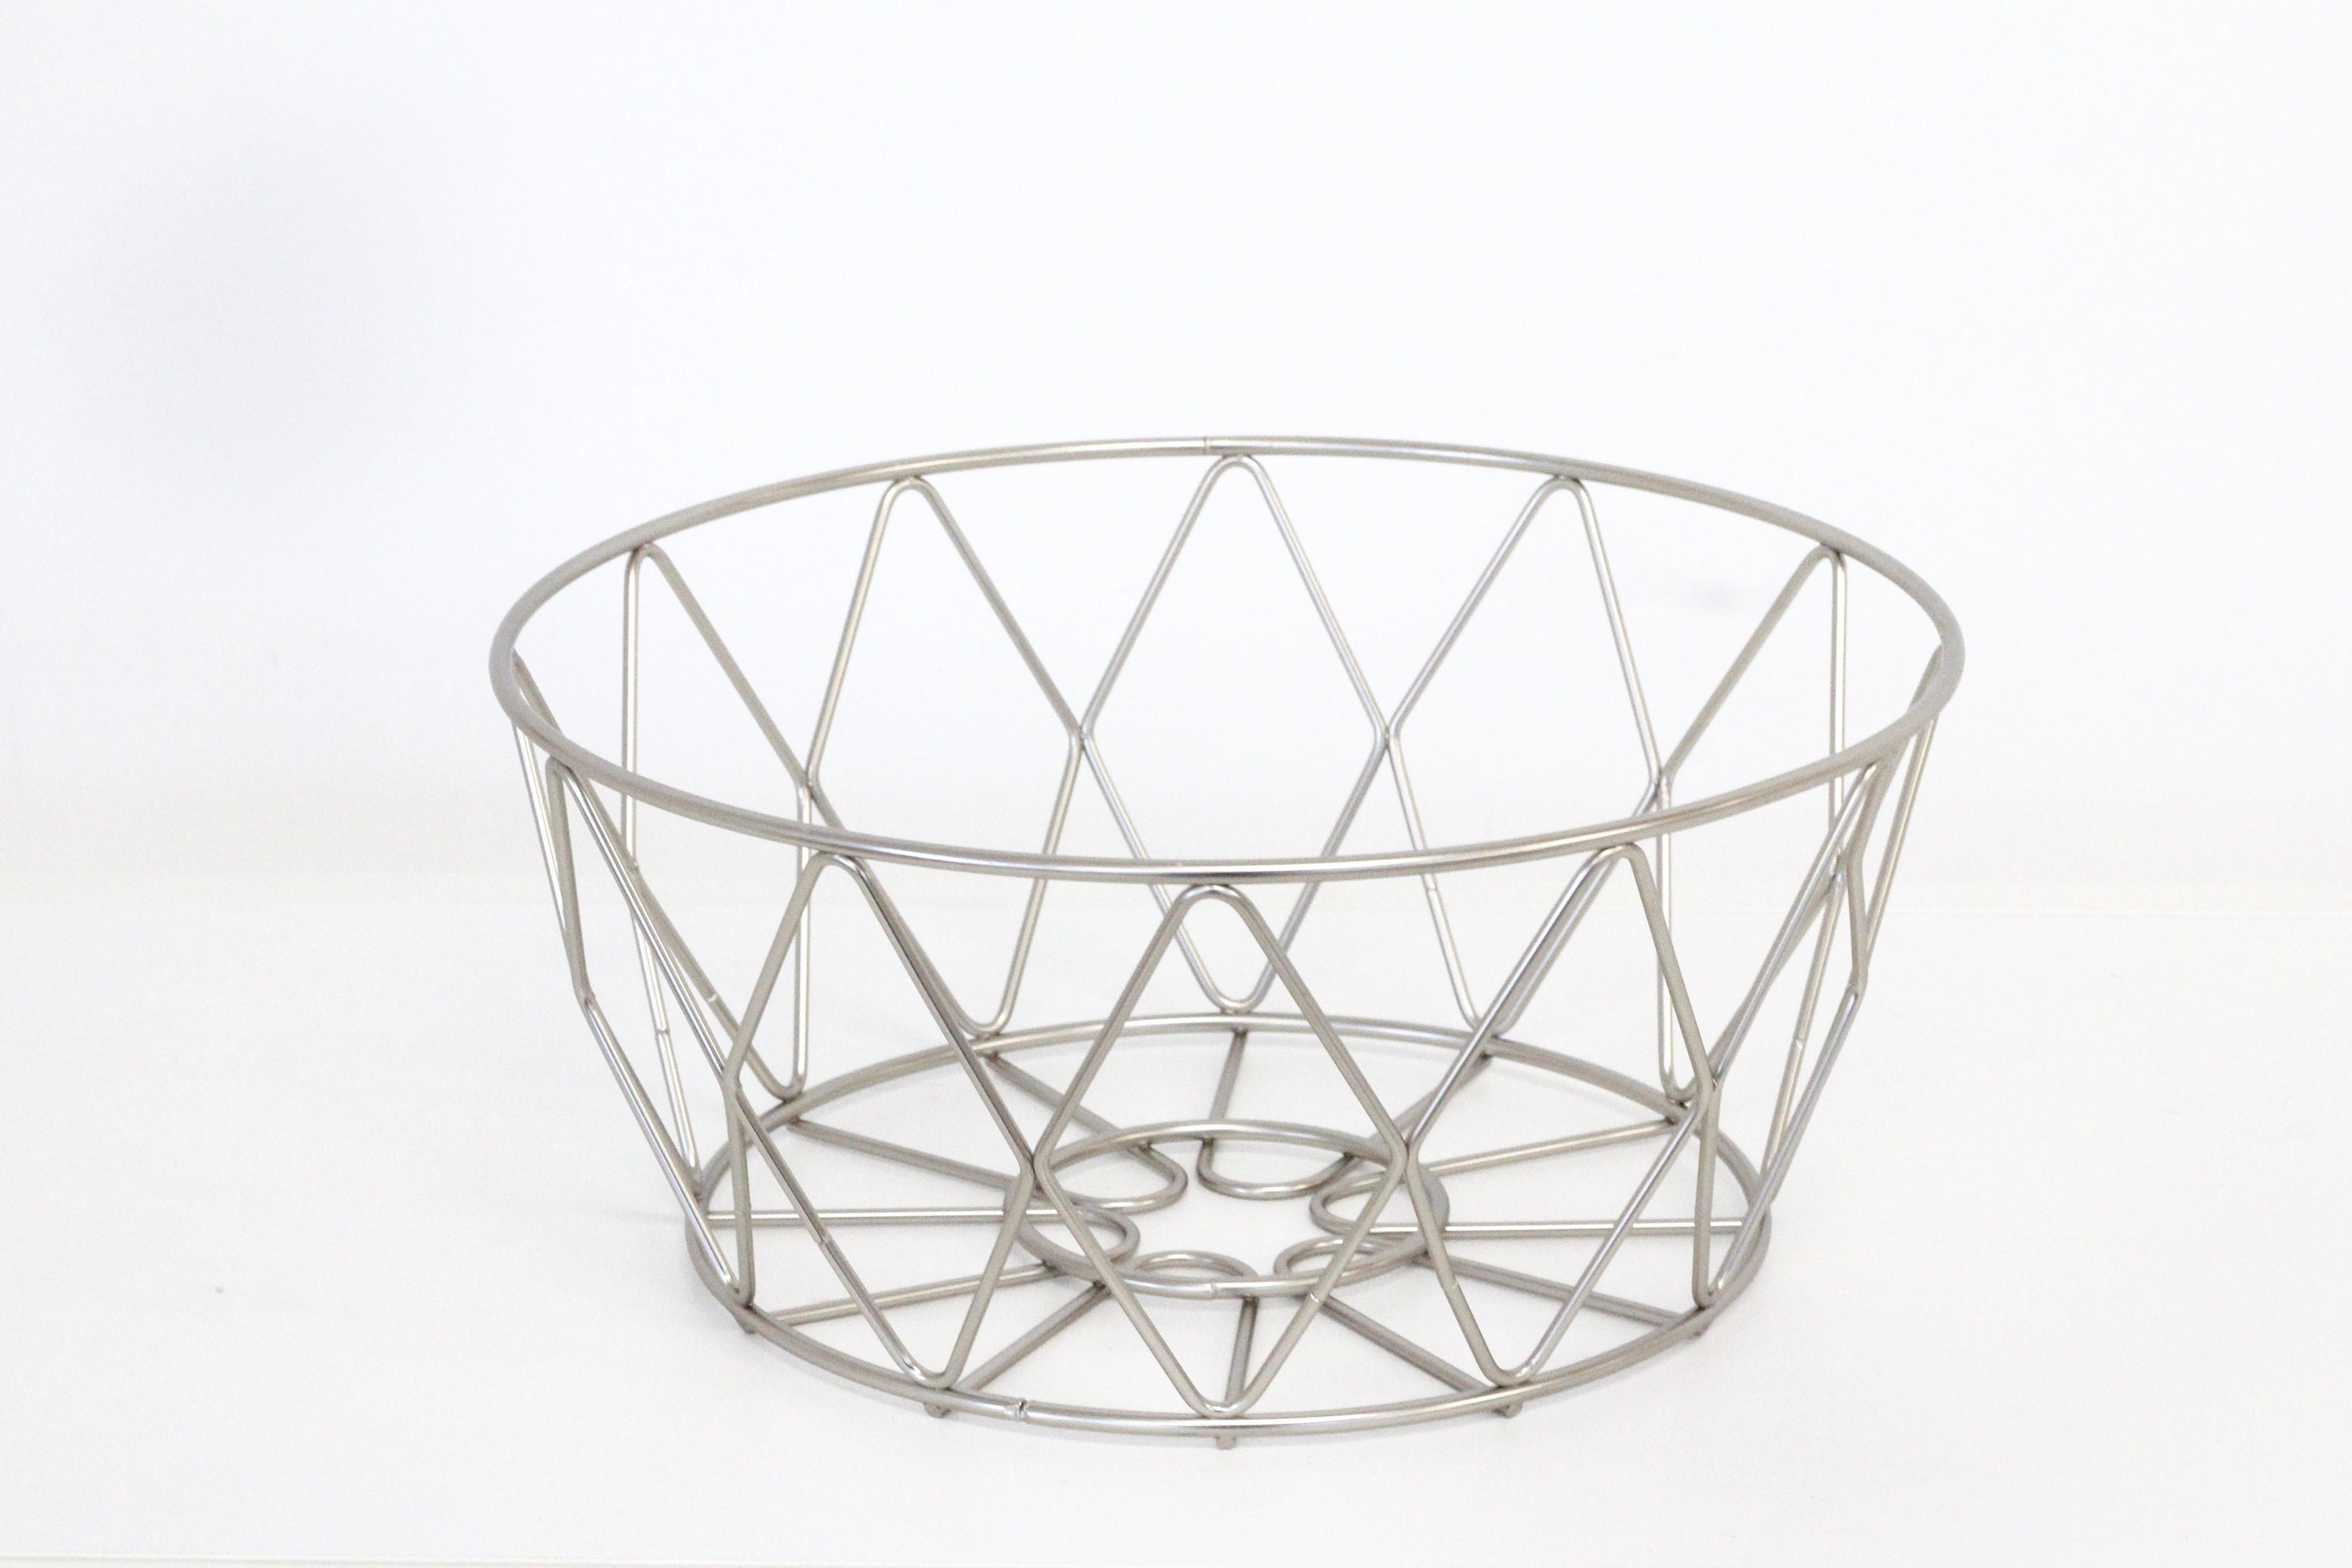 Satin Chrome Wire Basket for Fruits, Pantry Organization, Bathroom Storage and Entryway